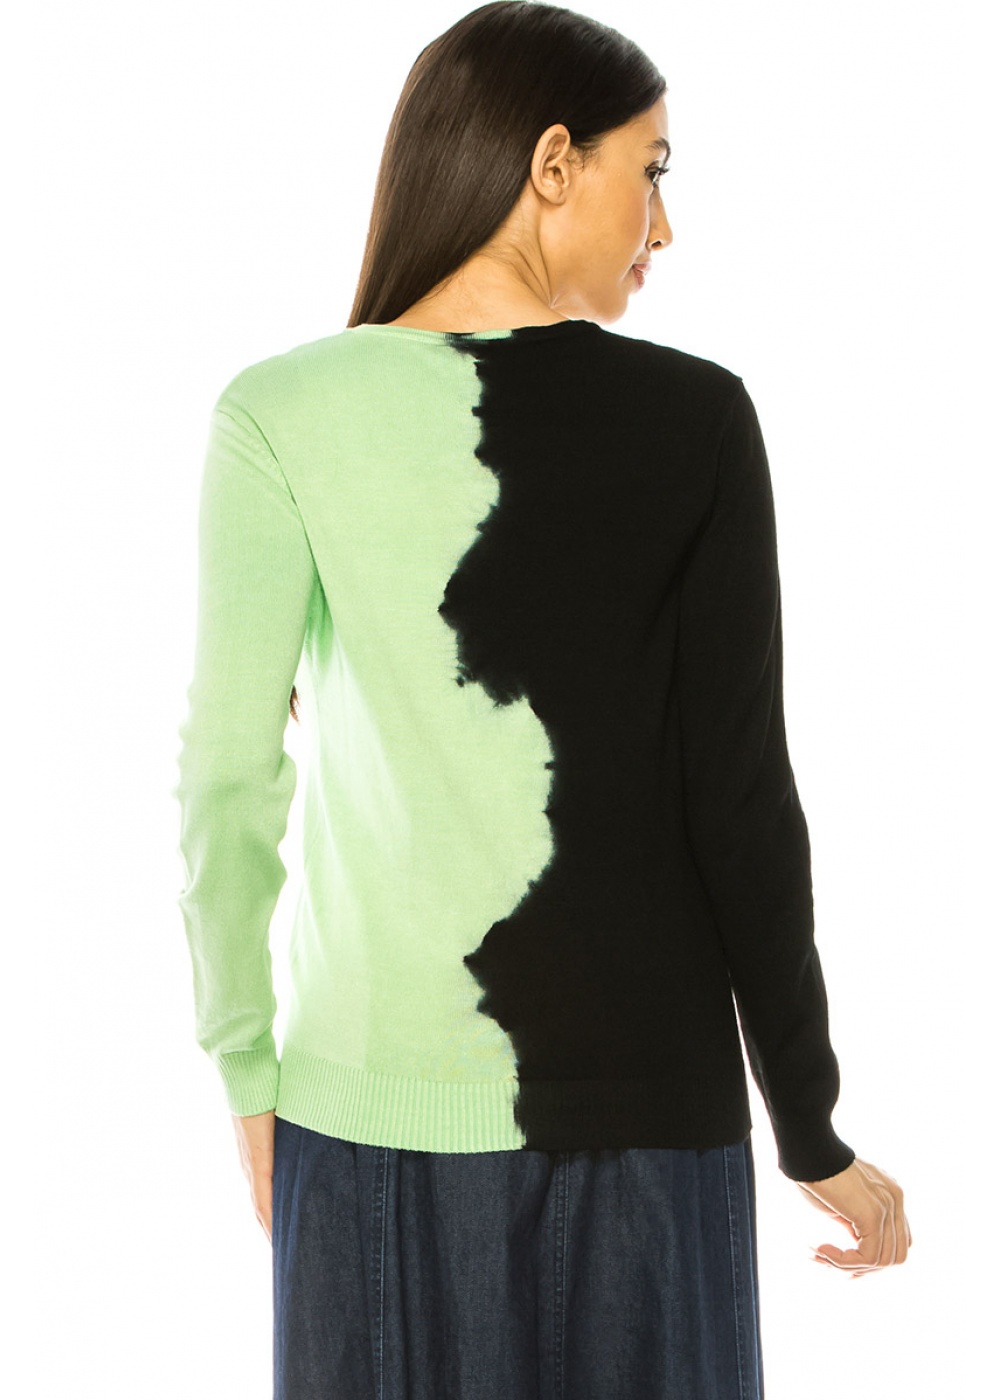 Green And Black Printed Sweater